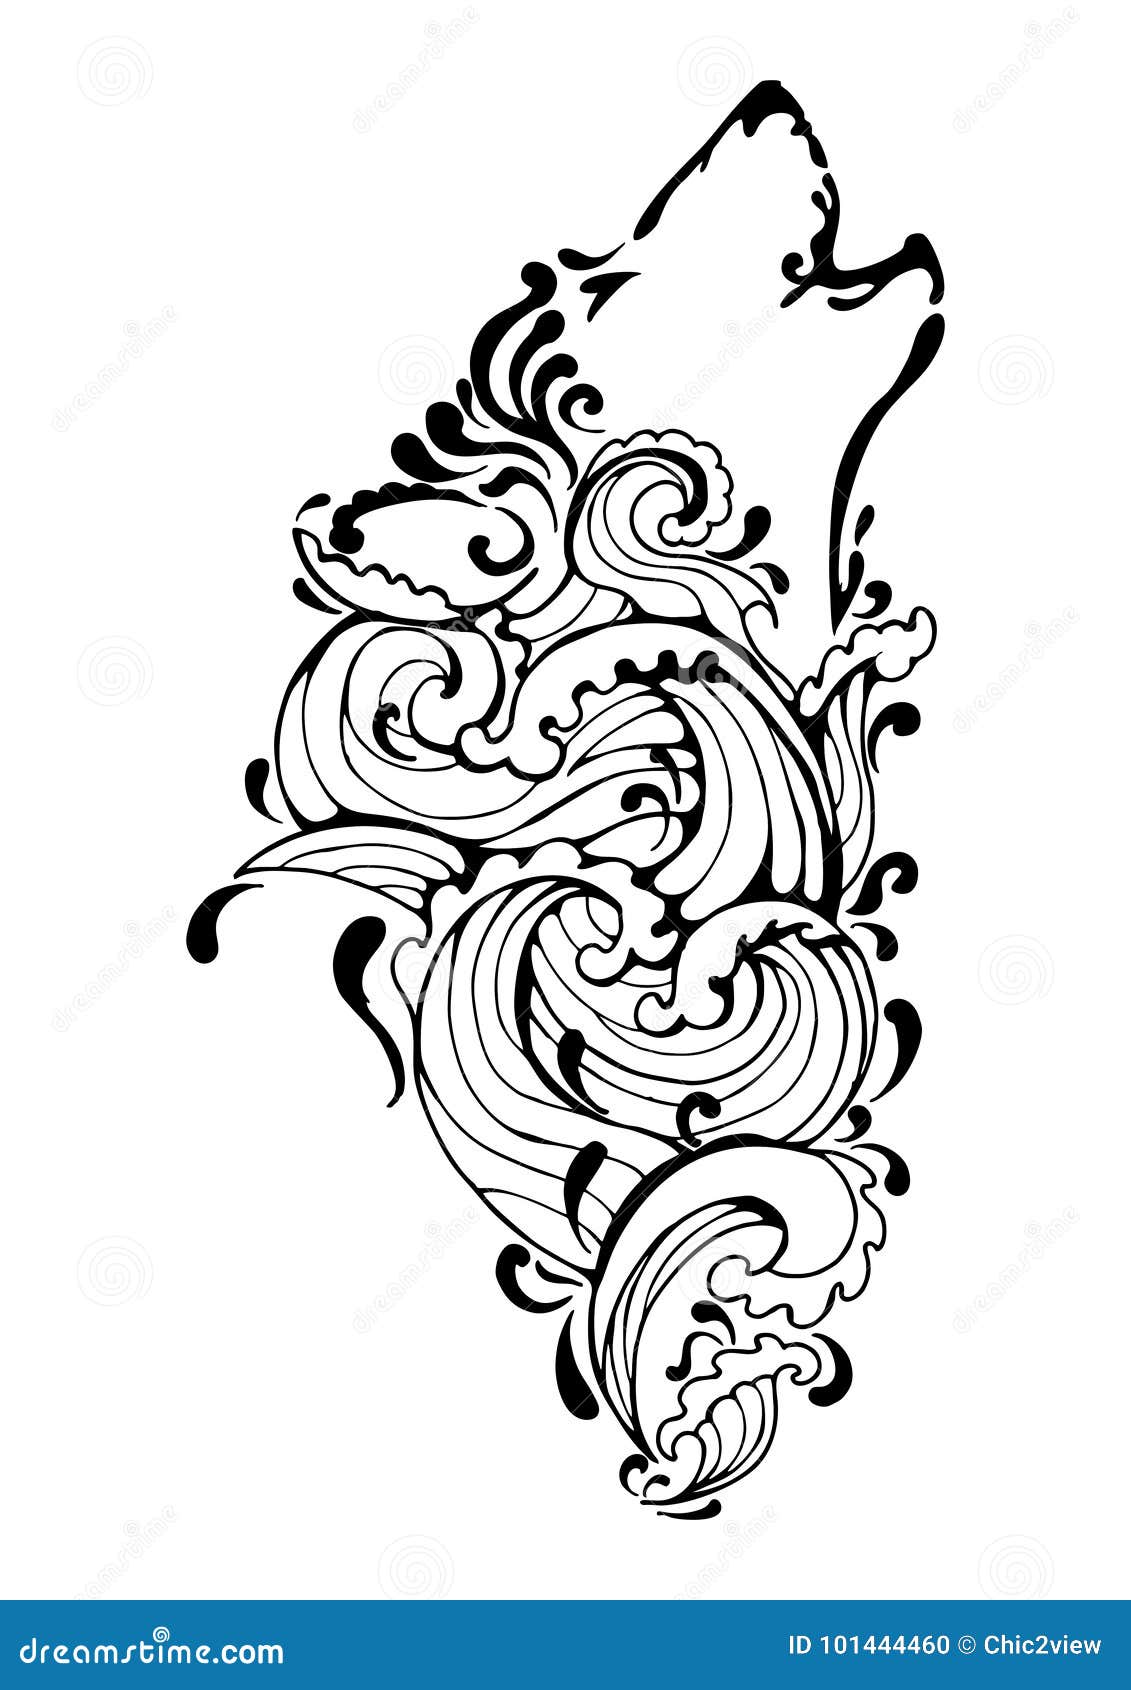 14949 Tribal Wave Tattoo Images Stock Photos  Vectors  Shutterstock